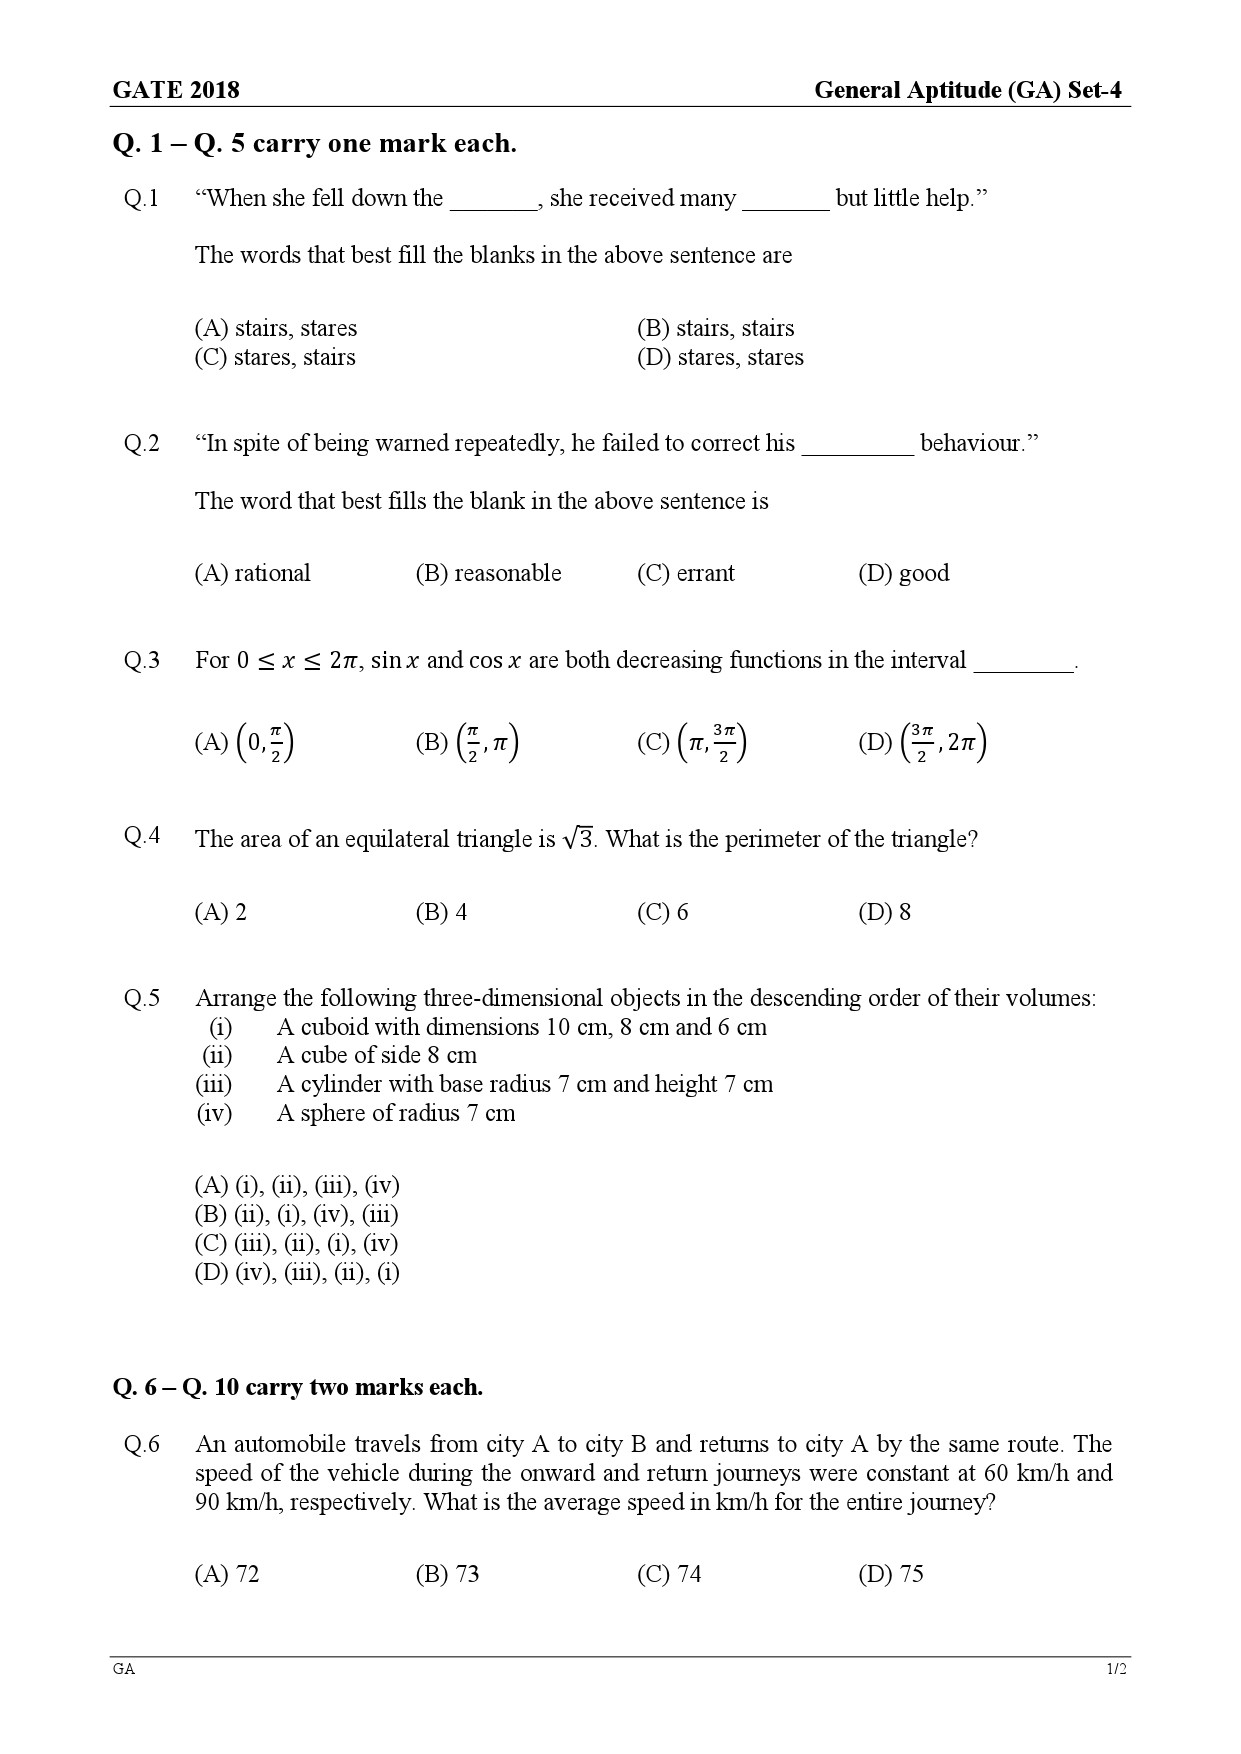 GATE Exam Question Paper 2018 Chemical Engineering 1